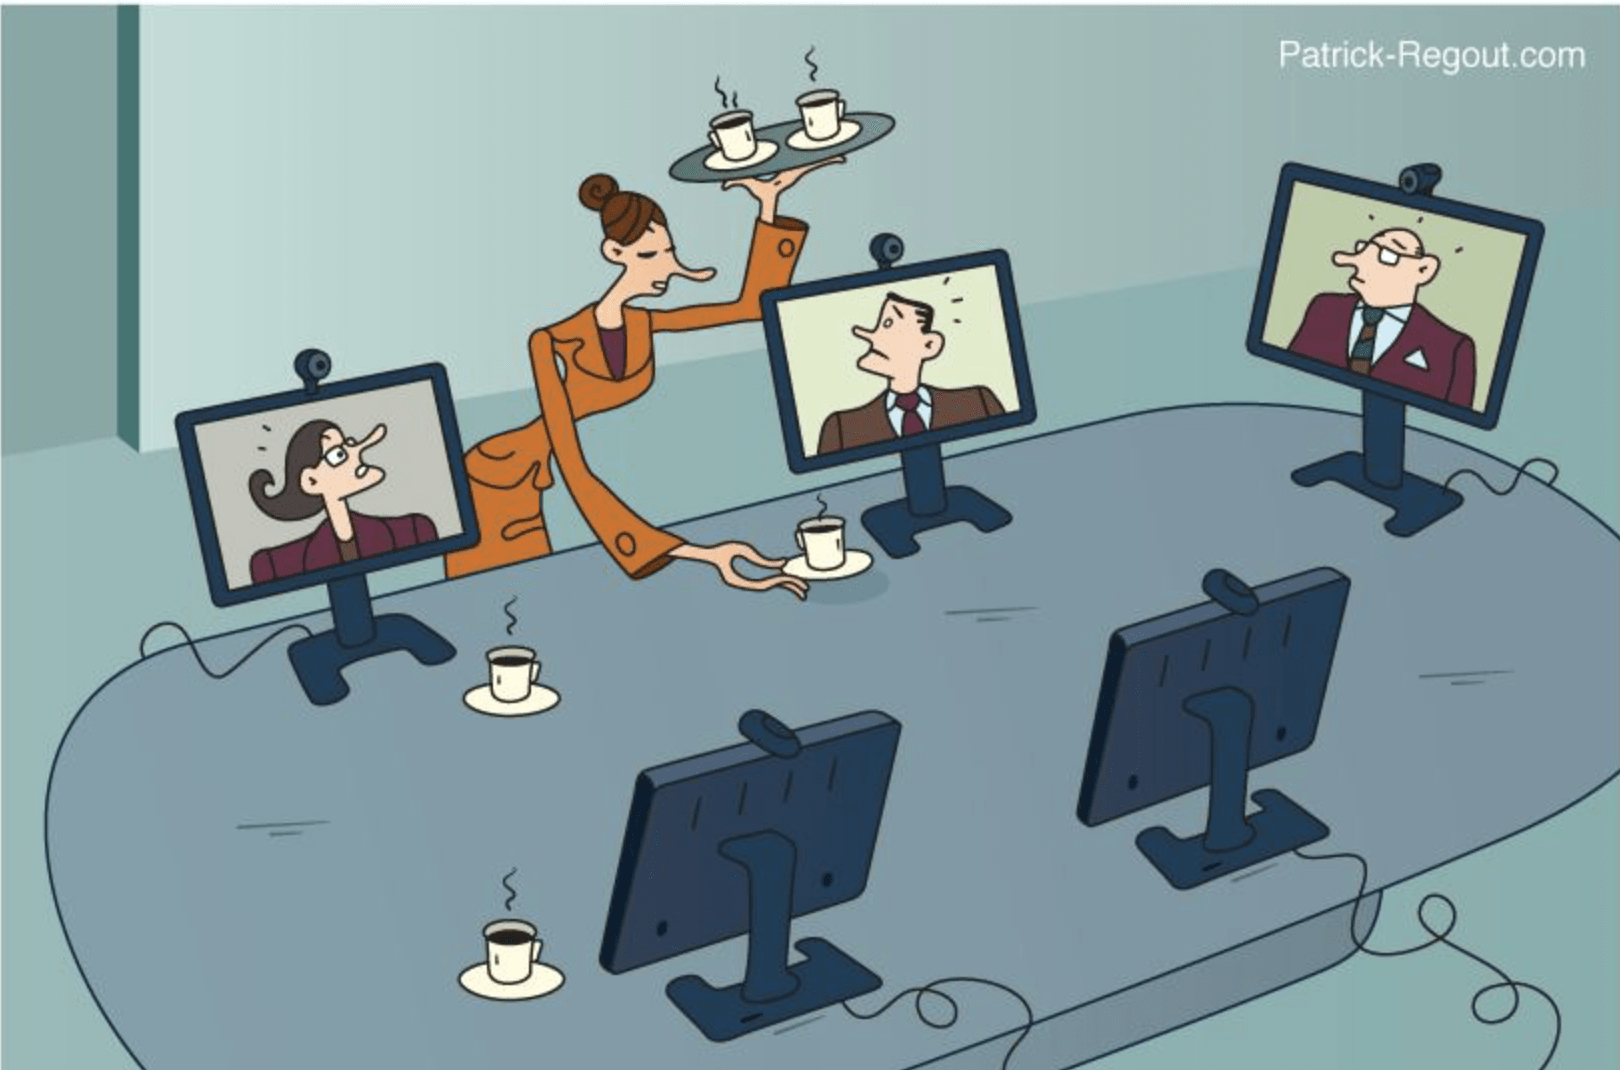 Read more about Videoconferencing